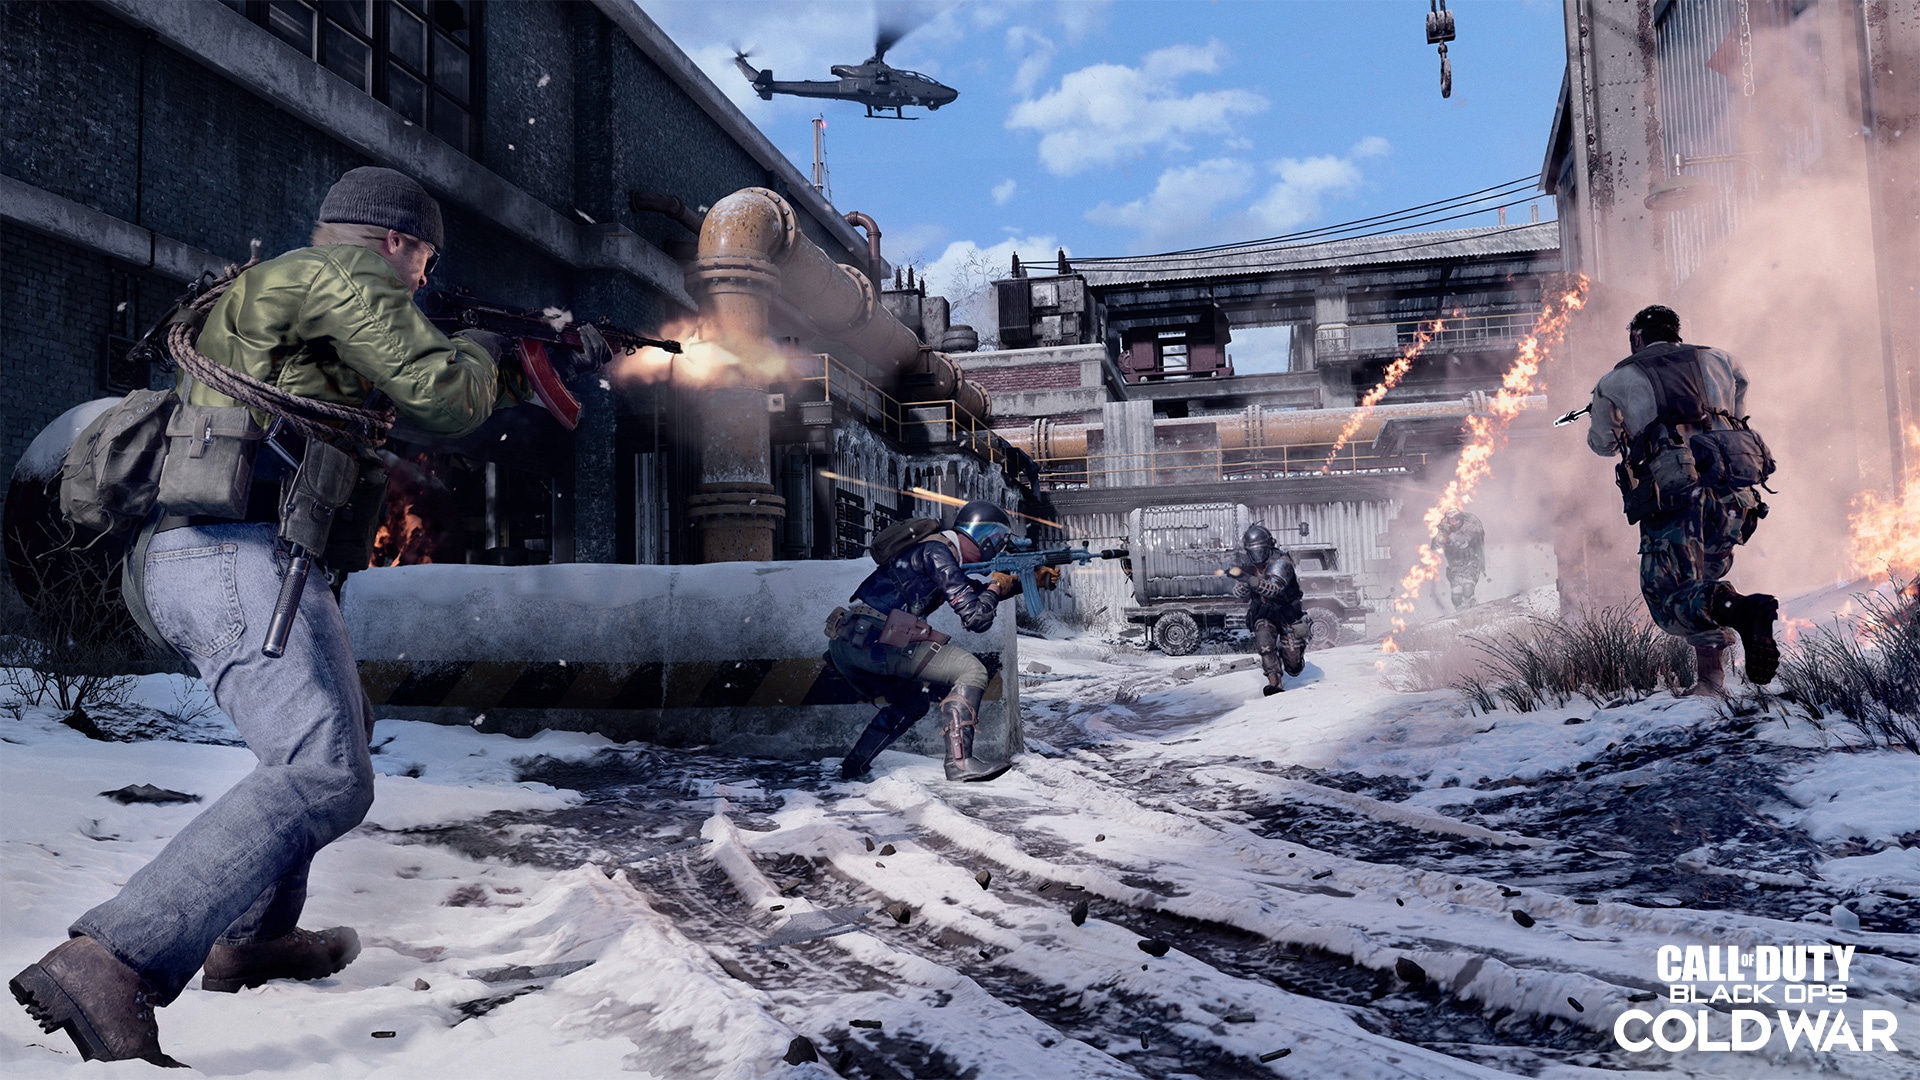 Remastered map and the Vargo 52 are coming to Black Ops Cold War